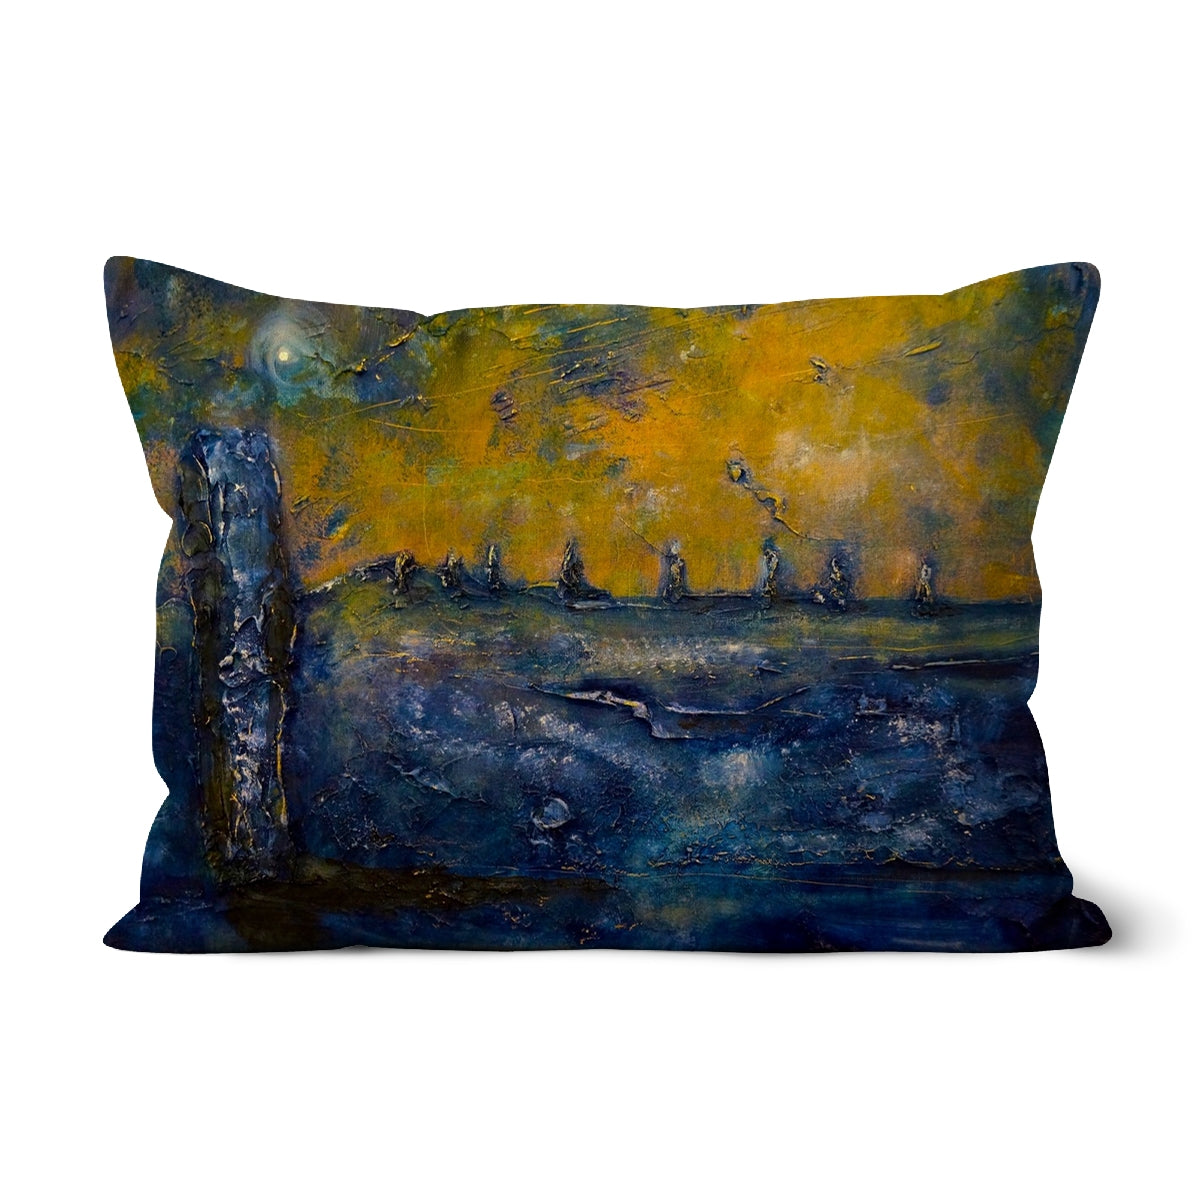 Brodgar Moonlight Orkney Art Gifts Cushion-Cushions-Orkney Art Gallery-Canvas-19"x13"-Paintings, Prints, Homeware, Art Gifts From Scotland By Scottish Artist Kevin Hunter